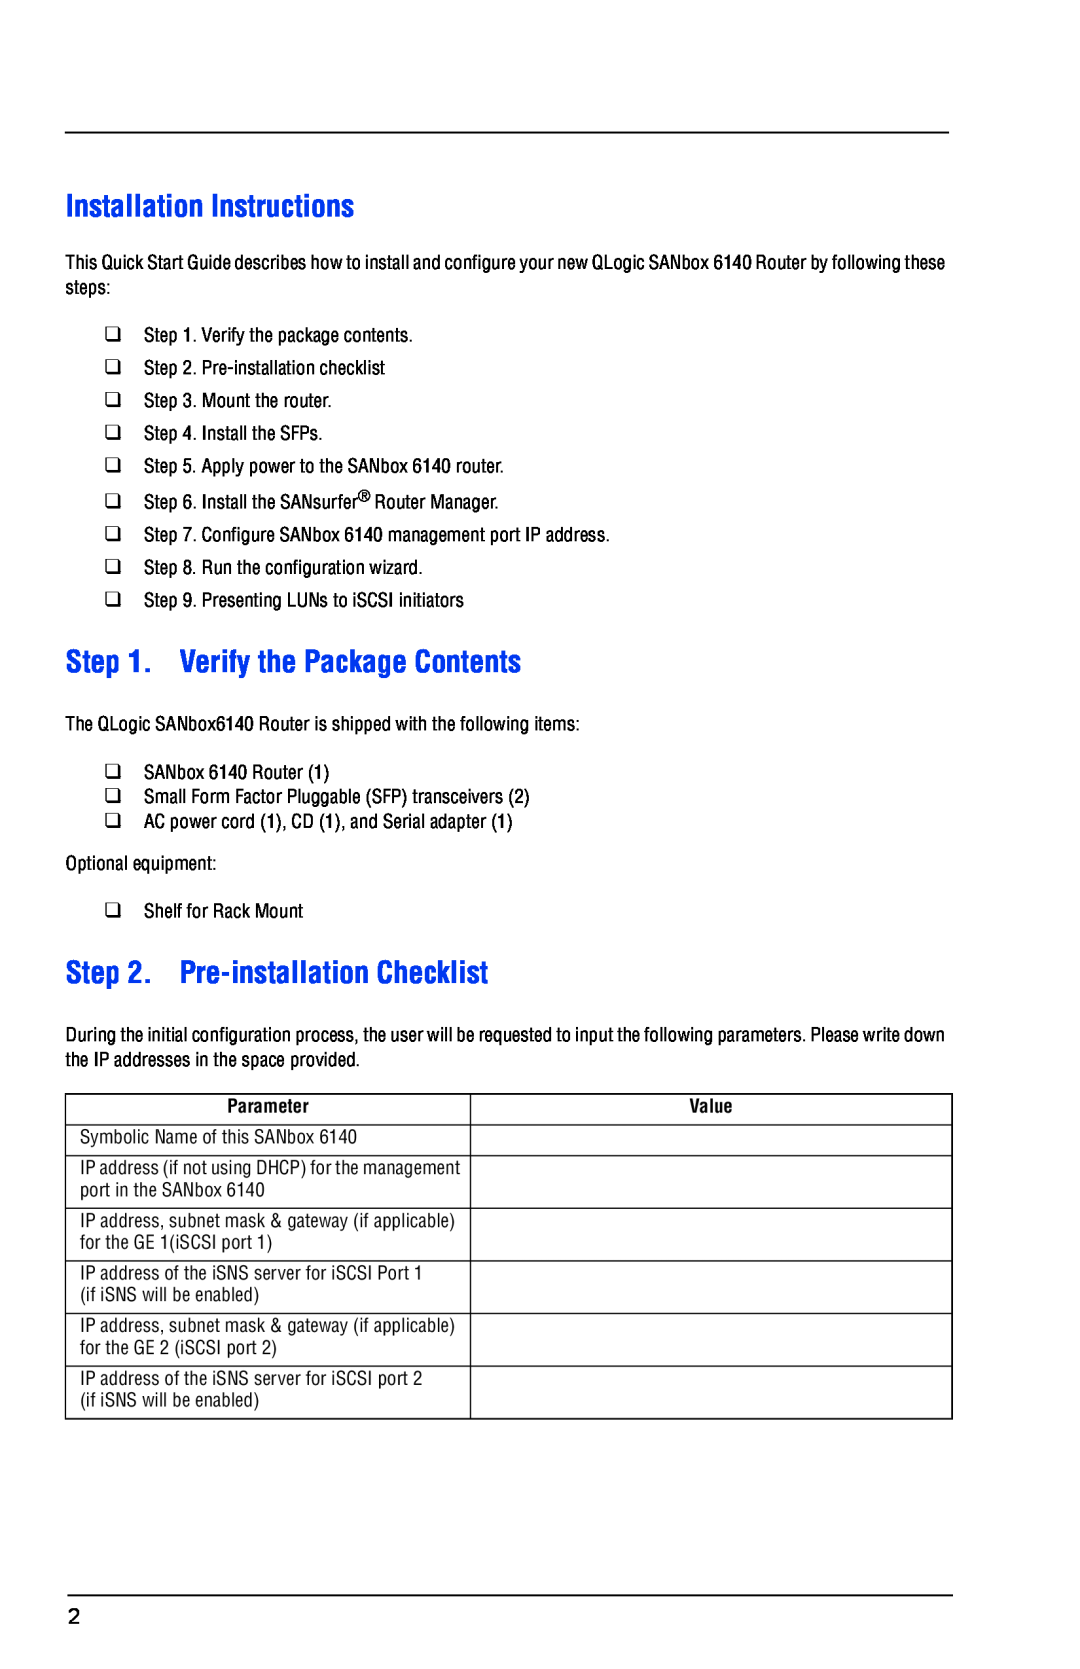 Q-Logic 6140 Installation Instructions, Verify the Package Contents, Pre-installation Checklist, Parameter, Value 